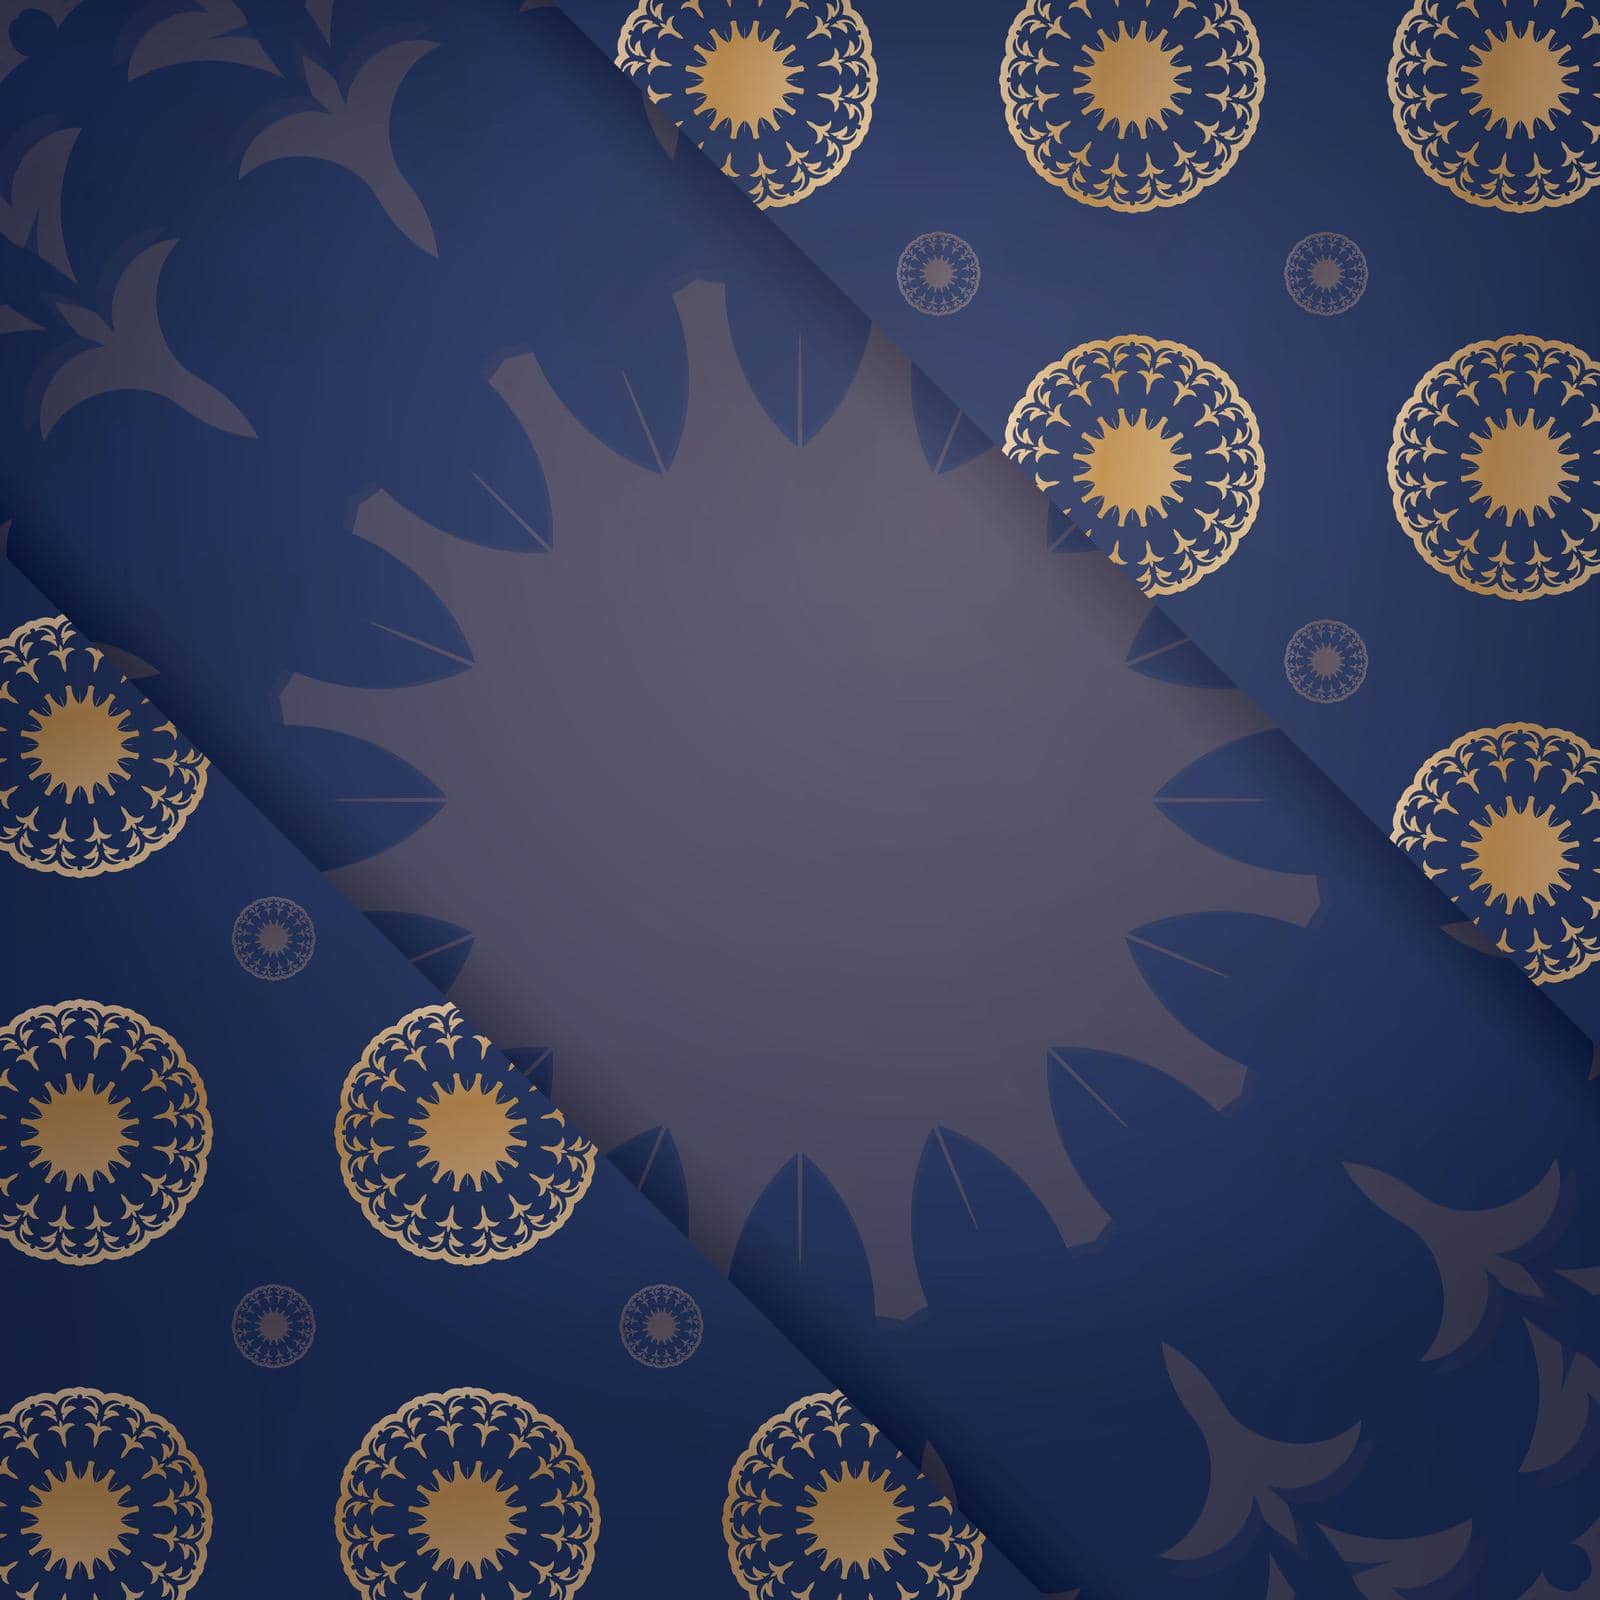 Business card template in dark blue with gold mandala pattern for your brand. by Javvani